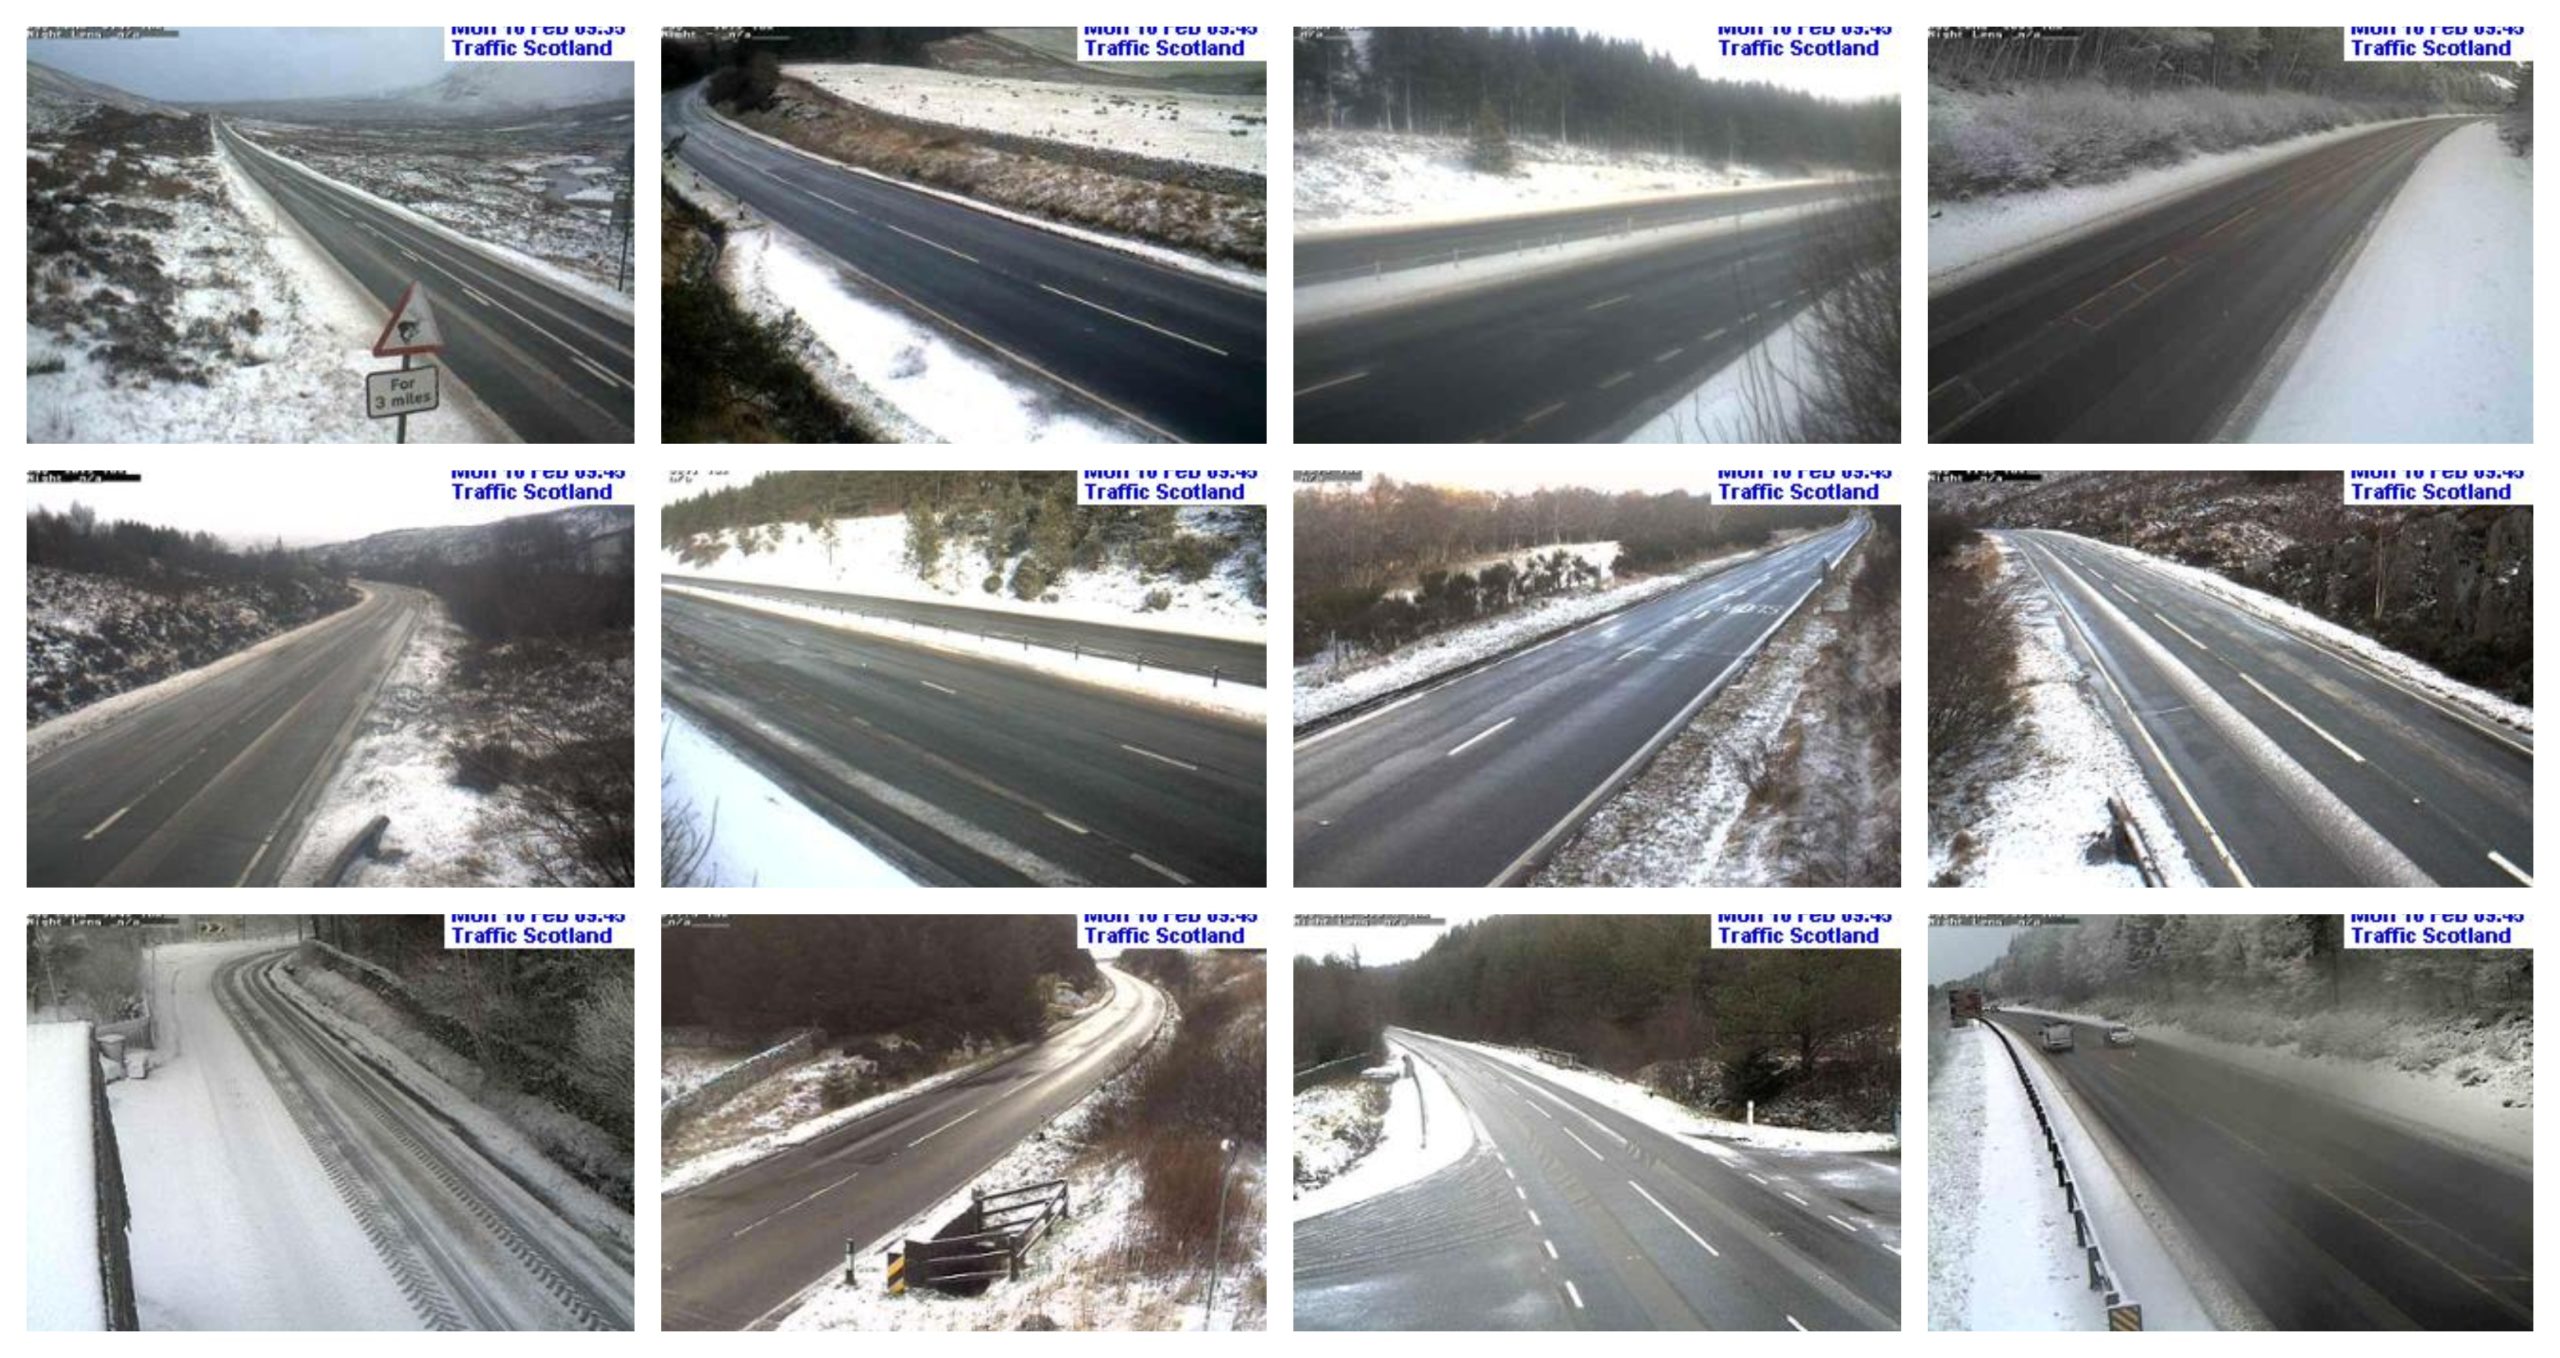 Traffic Scotland cameras show the extent of the snowfall across the north of Scotland.